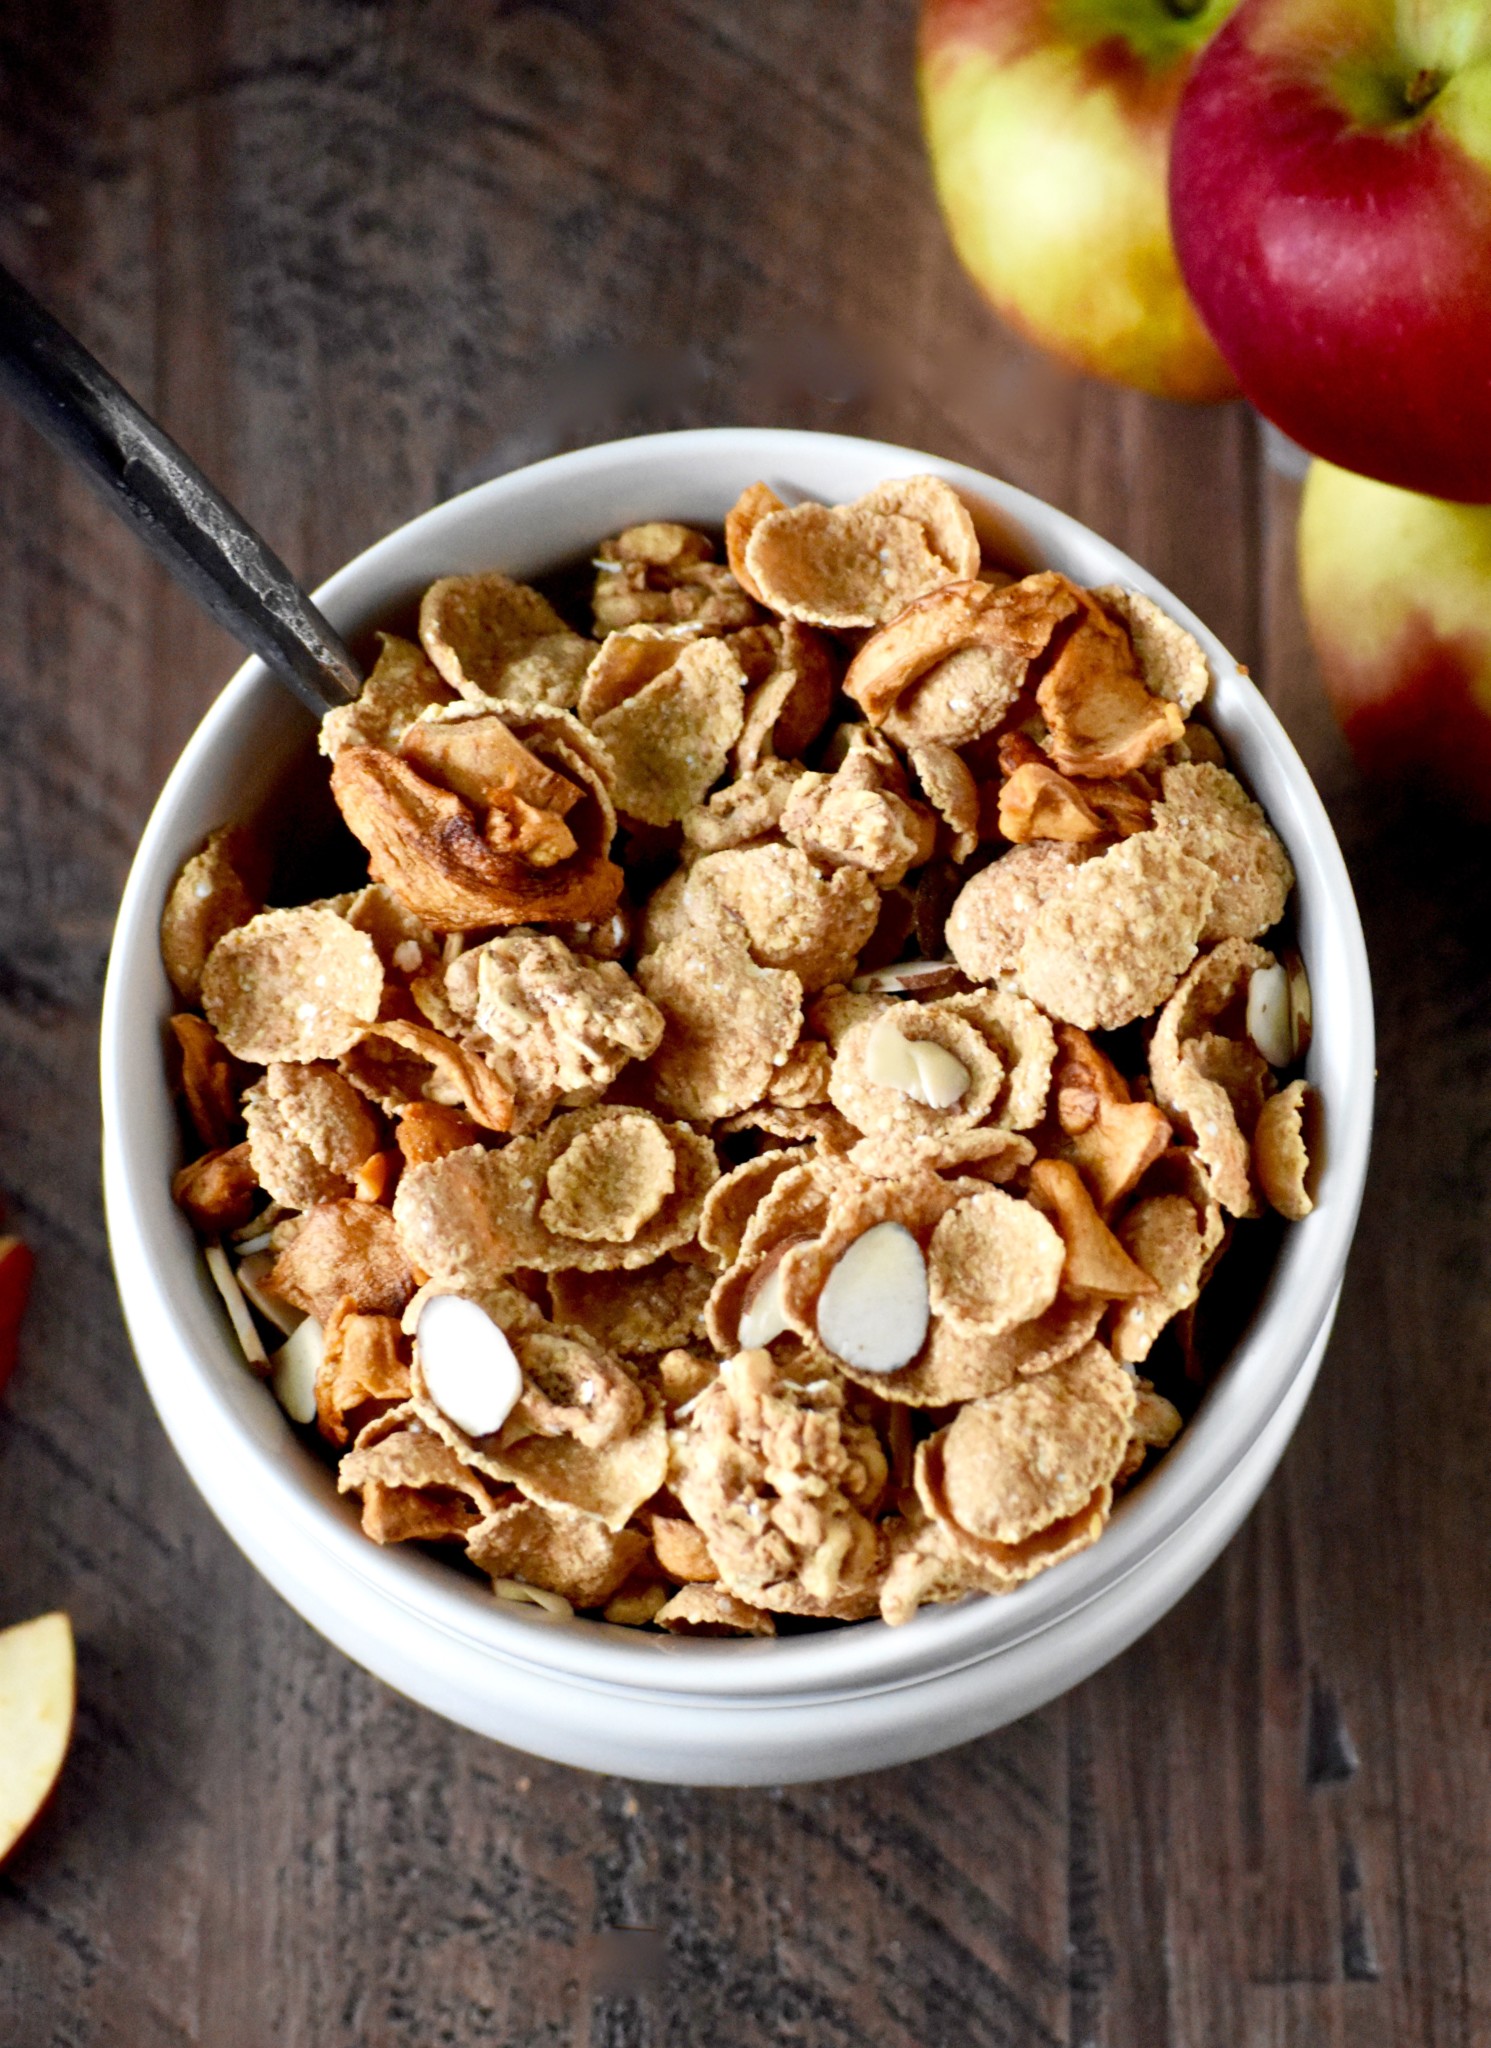 apple cinnamon almond breakfast cereal - a autumnal take on an everyday breakfast! // cait's plate